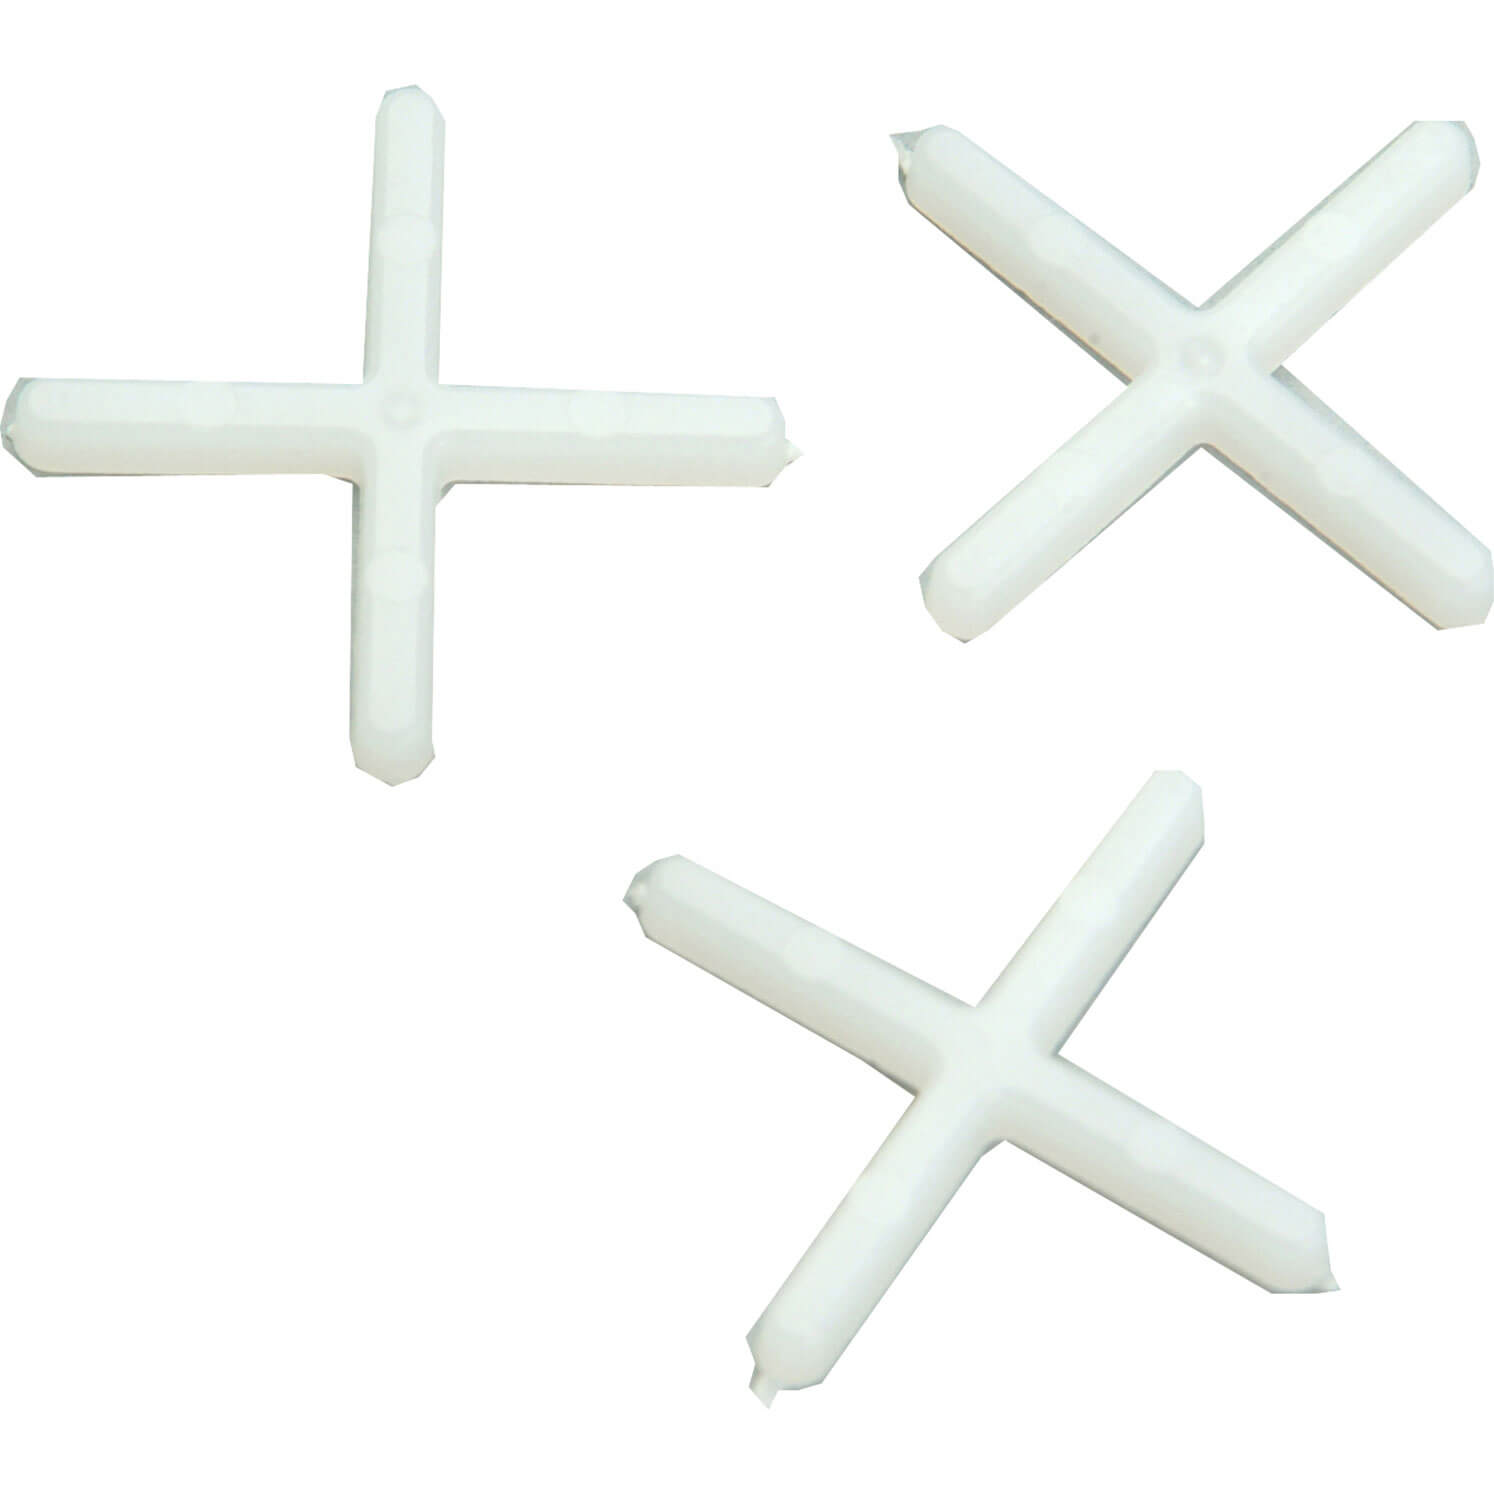 Image of Vitrex Plastic Wall Tile Spacers 2.5mm Pack of 500